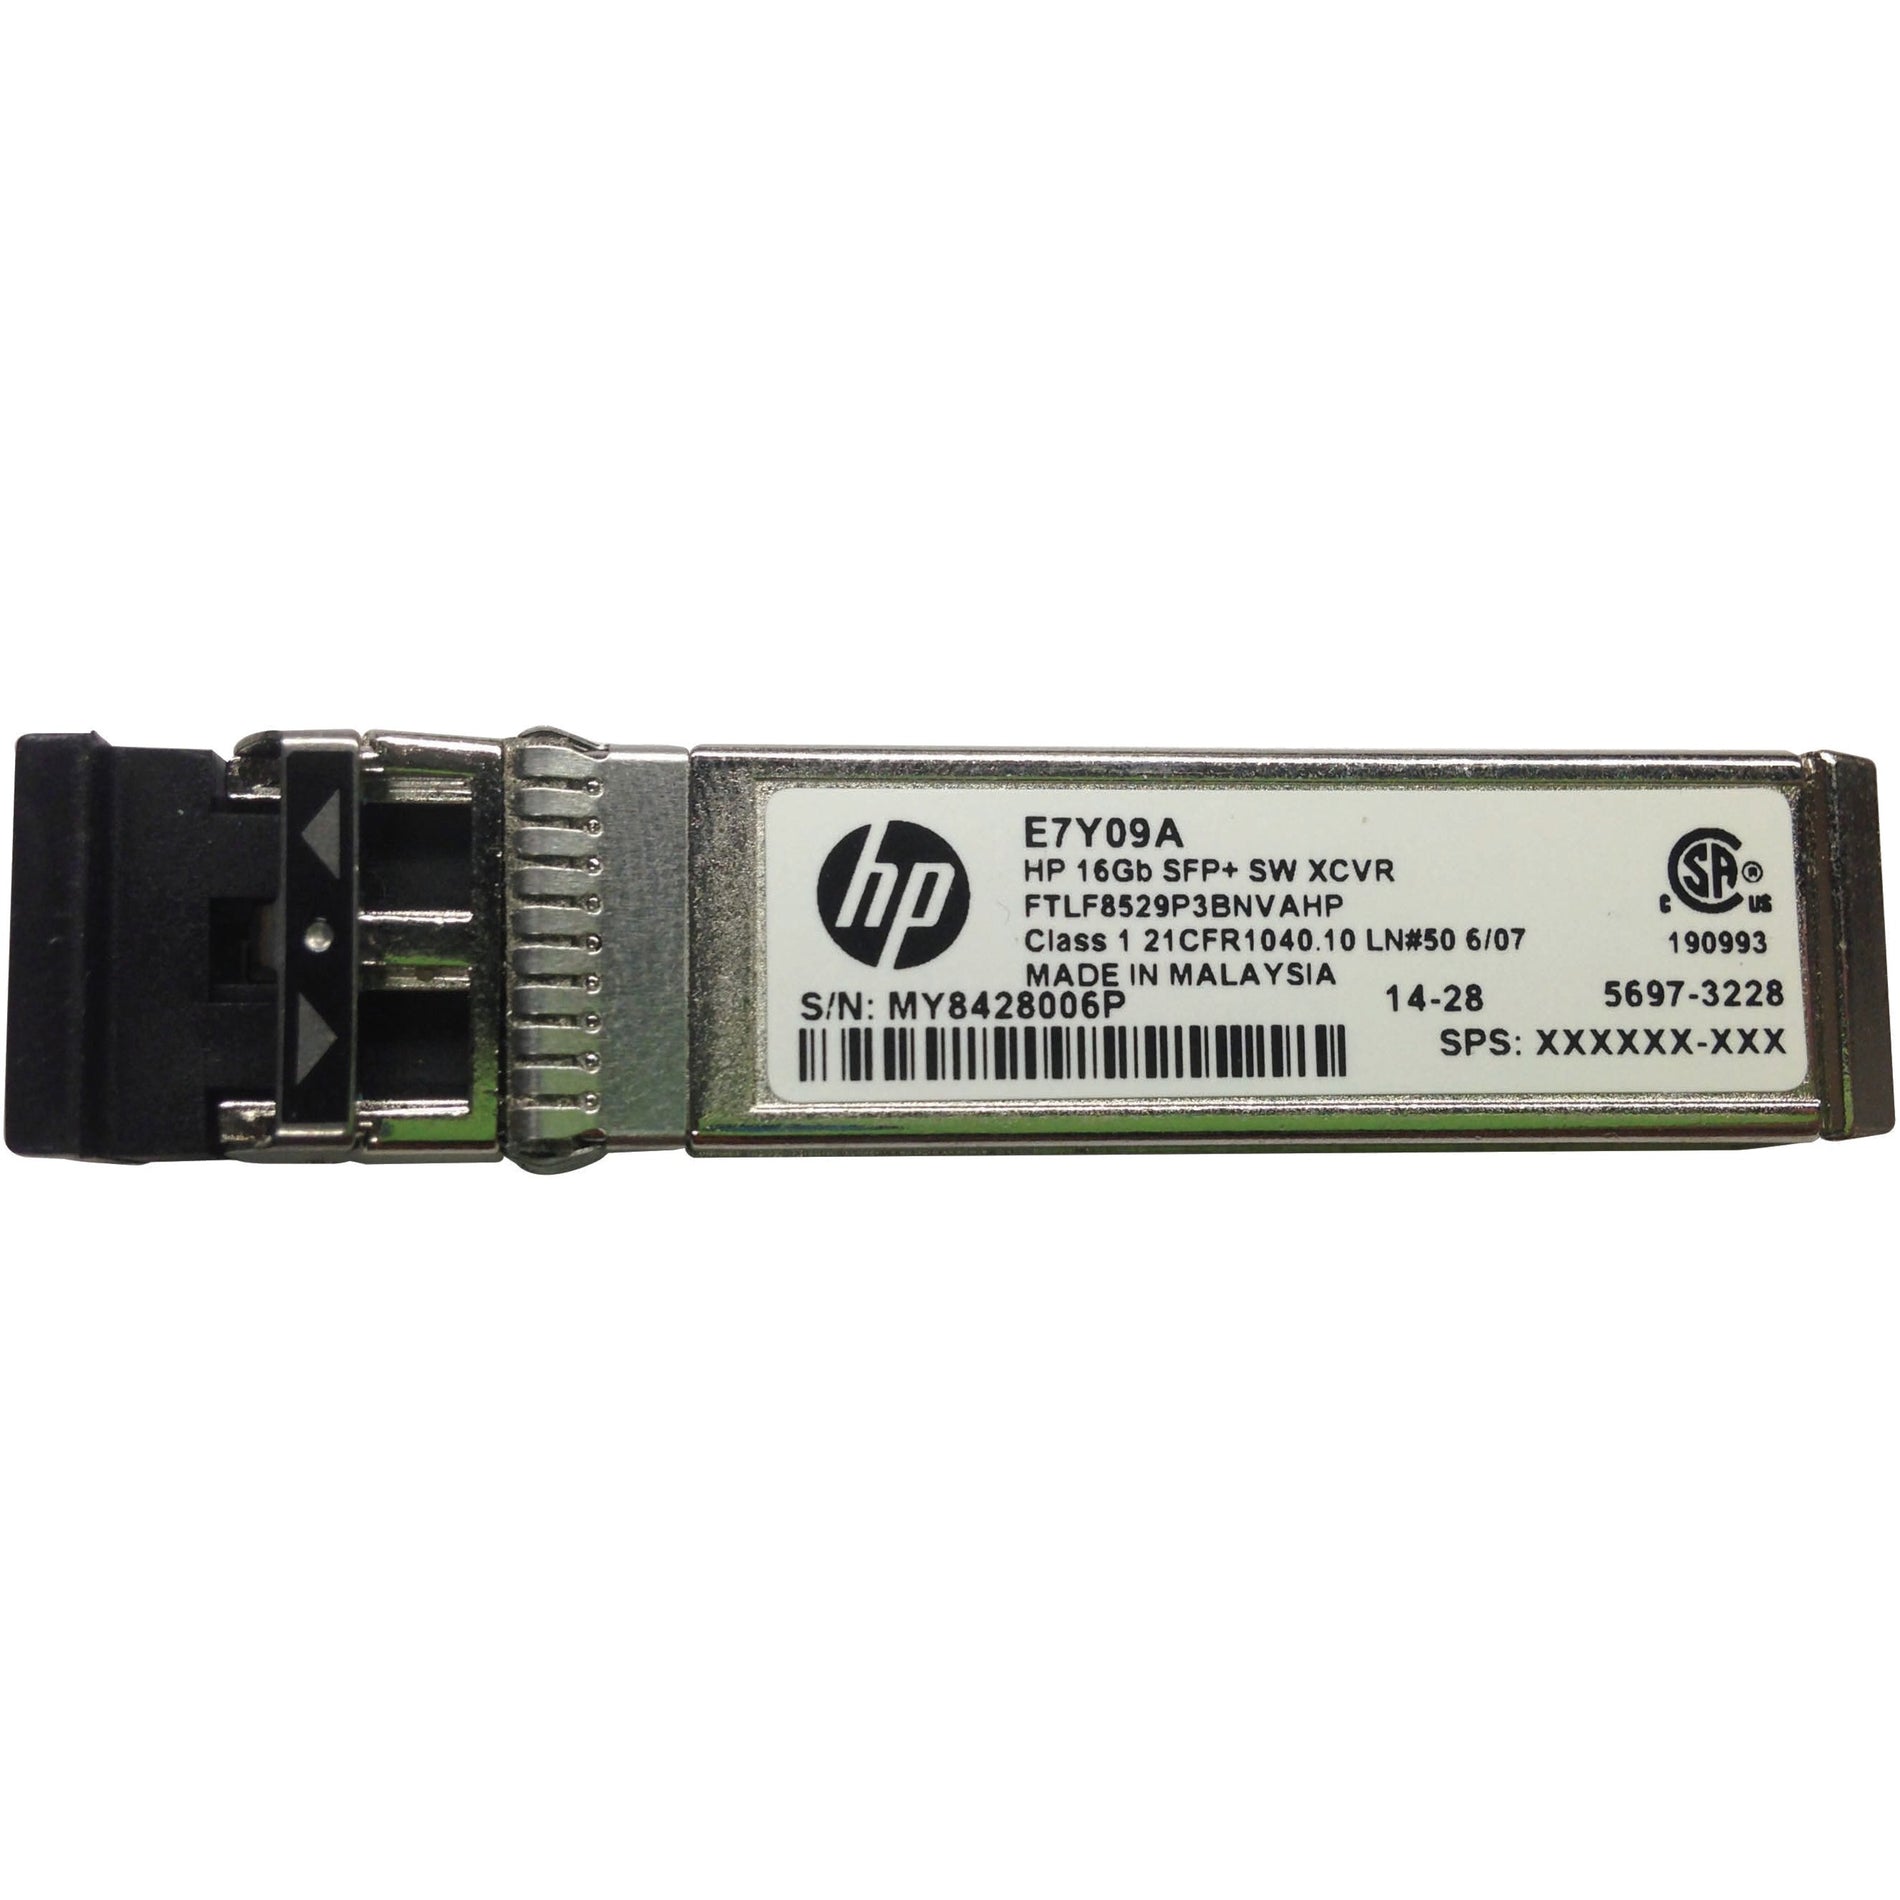 HPE 16 GB SFP+ Short Wave Extended Temp Transceiver (E7Y09A)